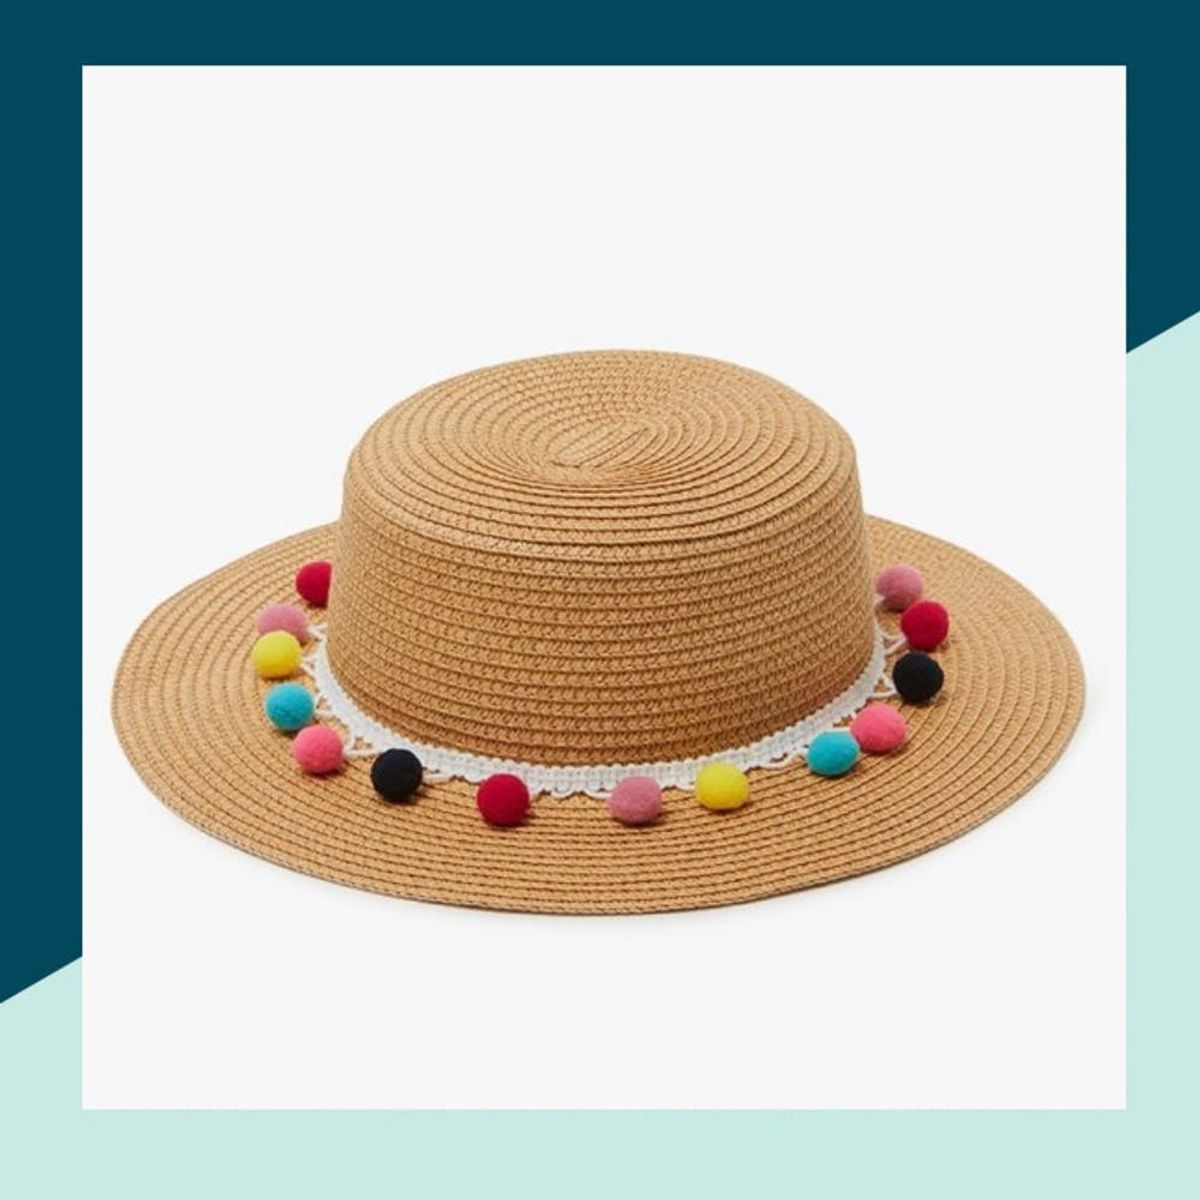 10 Festival-Approved Accessories You’ll Actually Wear Again